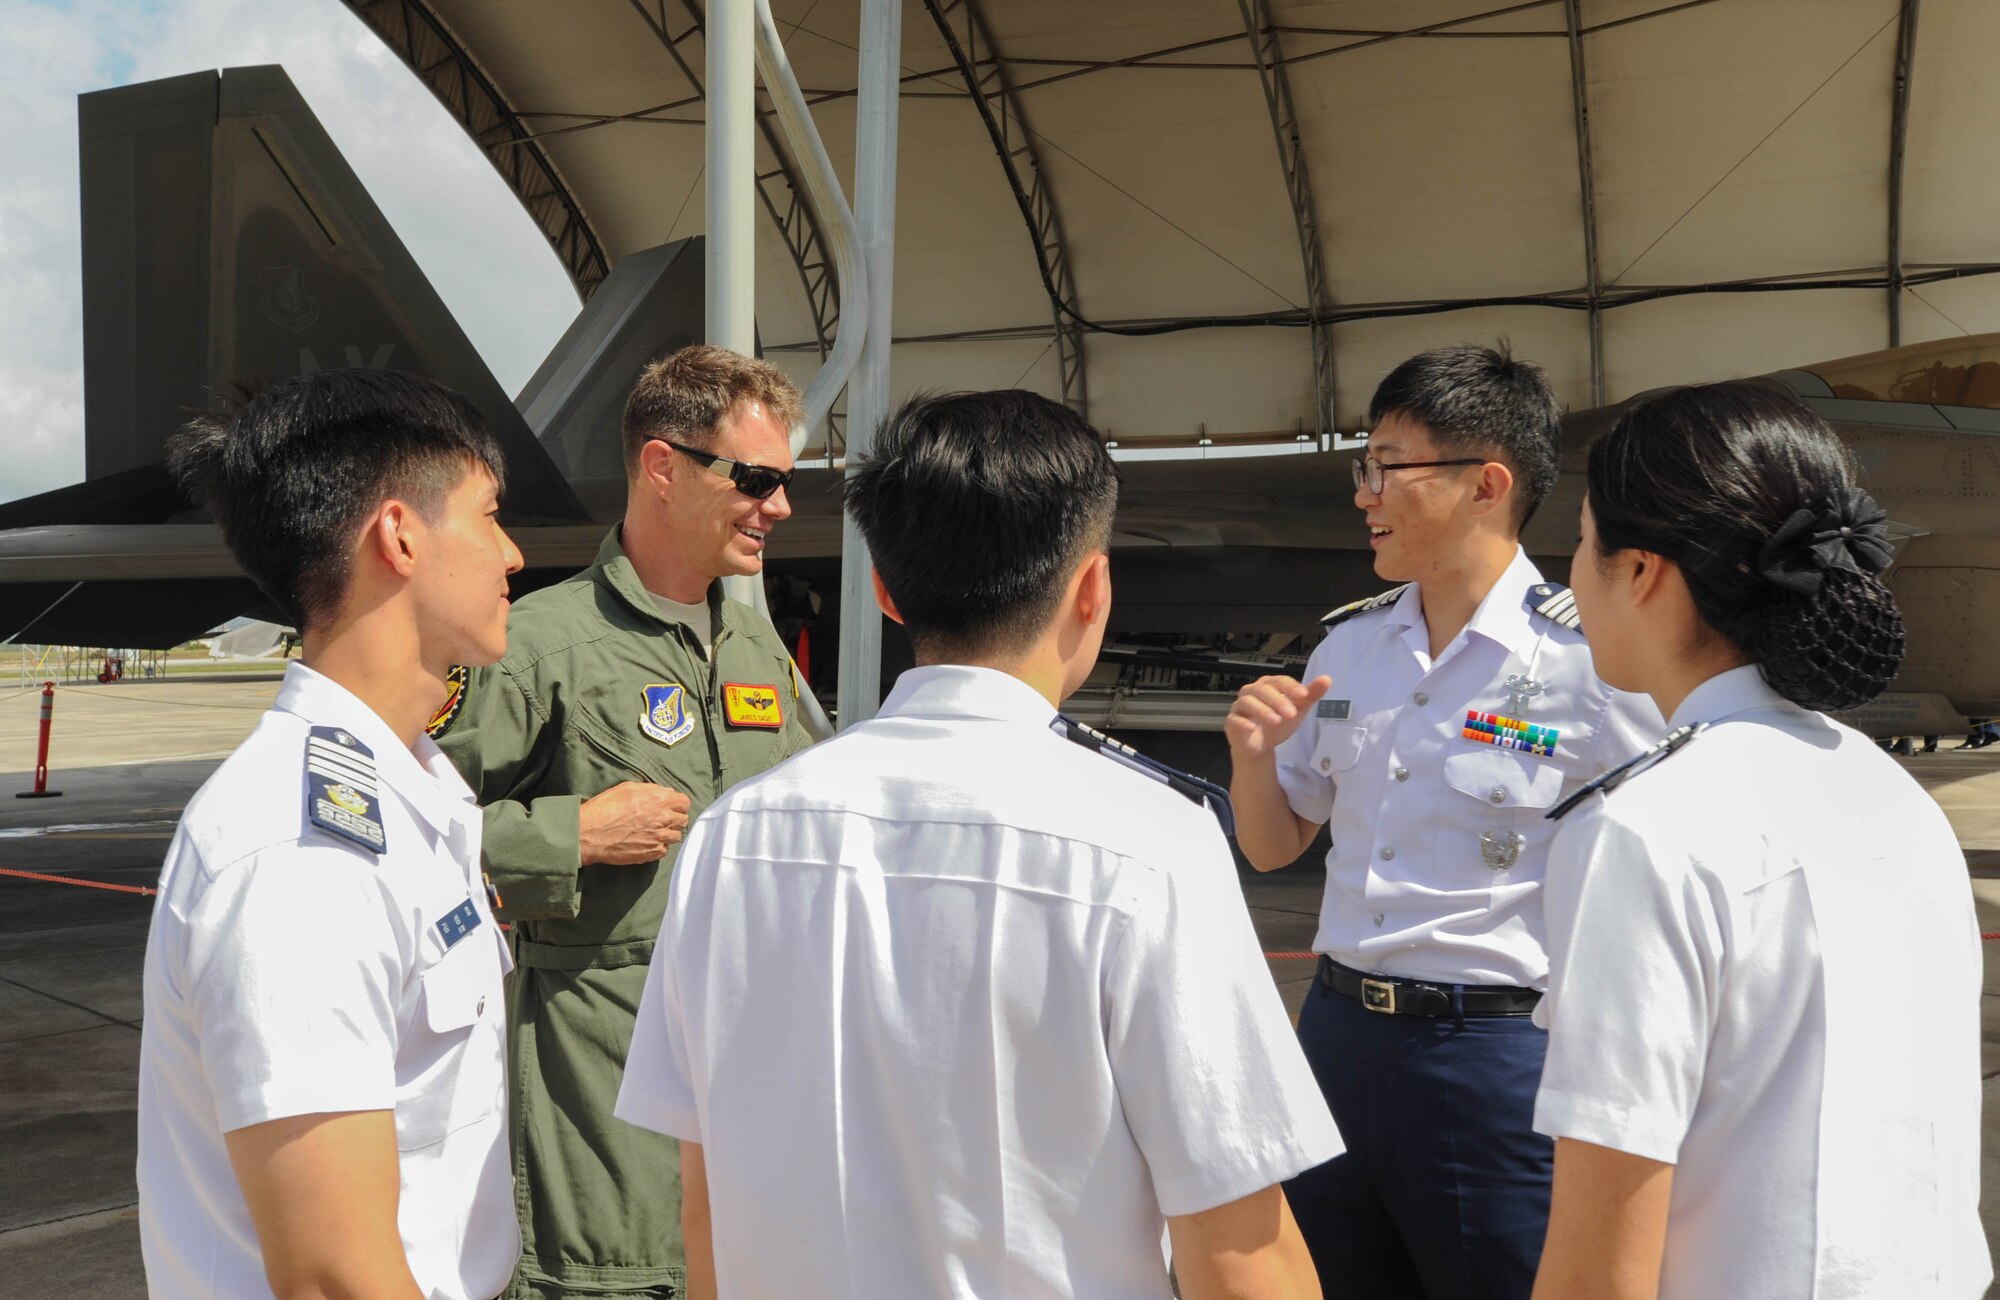 U.S. Air Force Lt. Col. James Sage, Hawaiian Raptors pilot, discusses U.S. Air Force F-22 Raptor capabilities with Republic of Korea Air Force Academy cadets, Nov. 10, 2015, Joint Base Pearl Harbor-Hickam, Hawaii. The cadets’ visit was part of an effort to build a foundation of partnership and interoperability between Headquarters Pacific Air Forces and future ROKAF leaders. (U.S. Air Force photo by Tech. Sgt. Amanda Dick/Released)